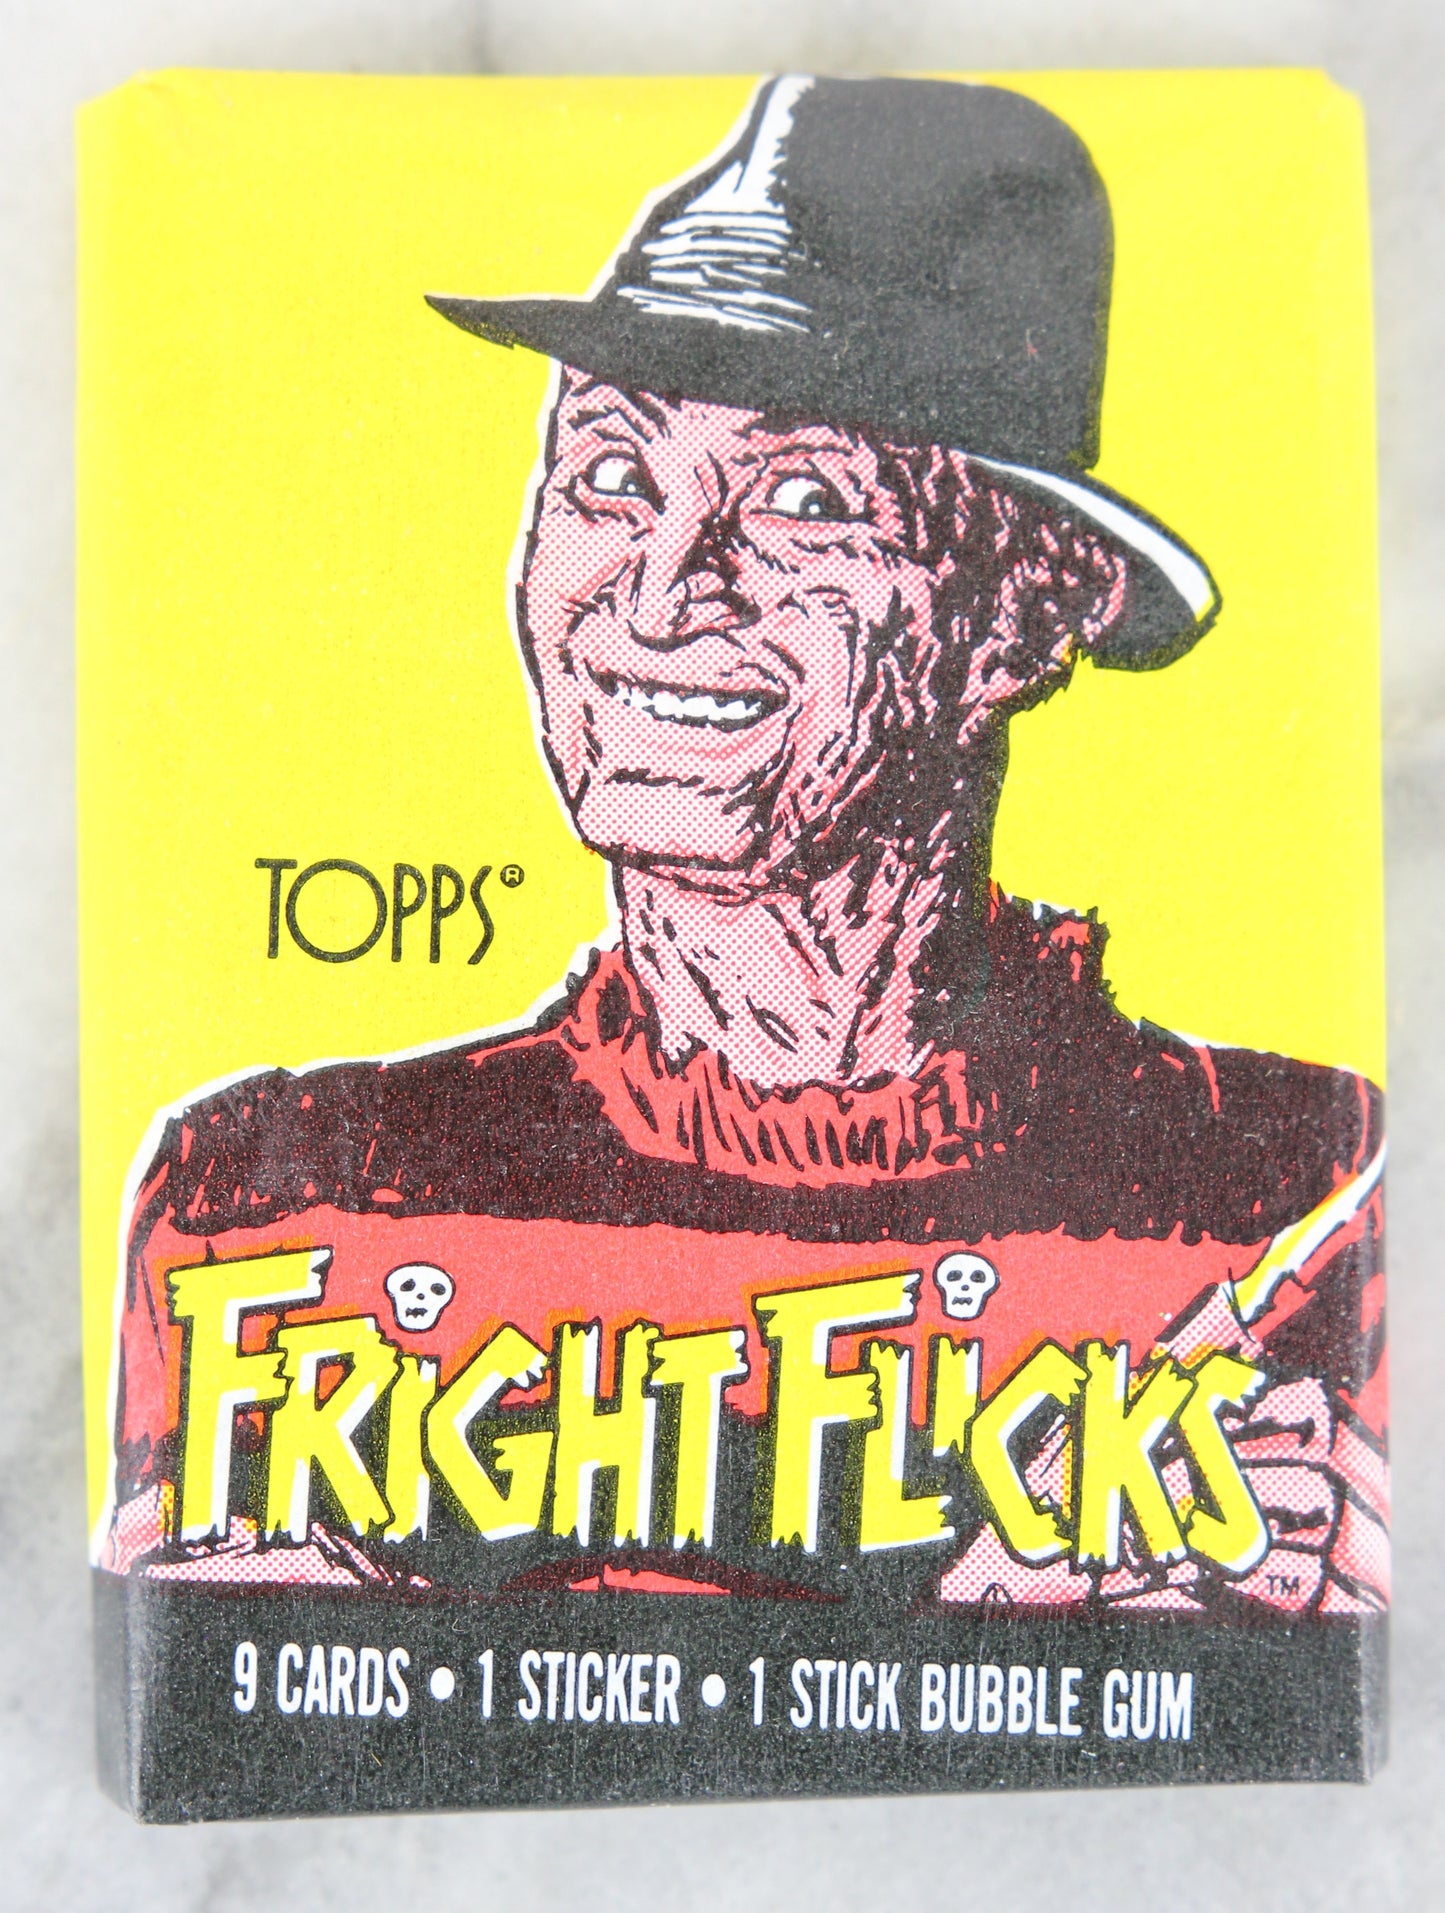 Topps Fright Flicks Collectible Trading Cards, One Wax Pack, Freddy Krueger, 1988